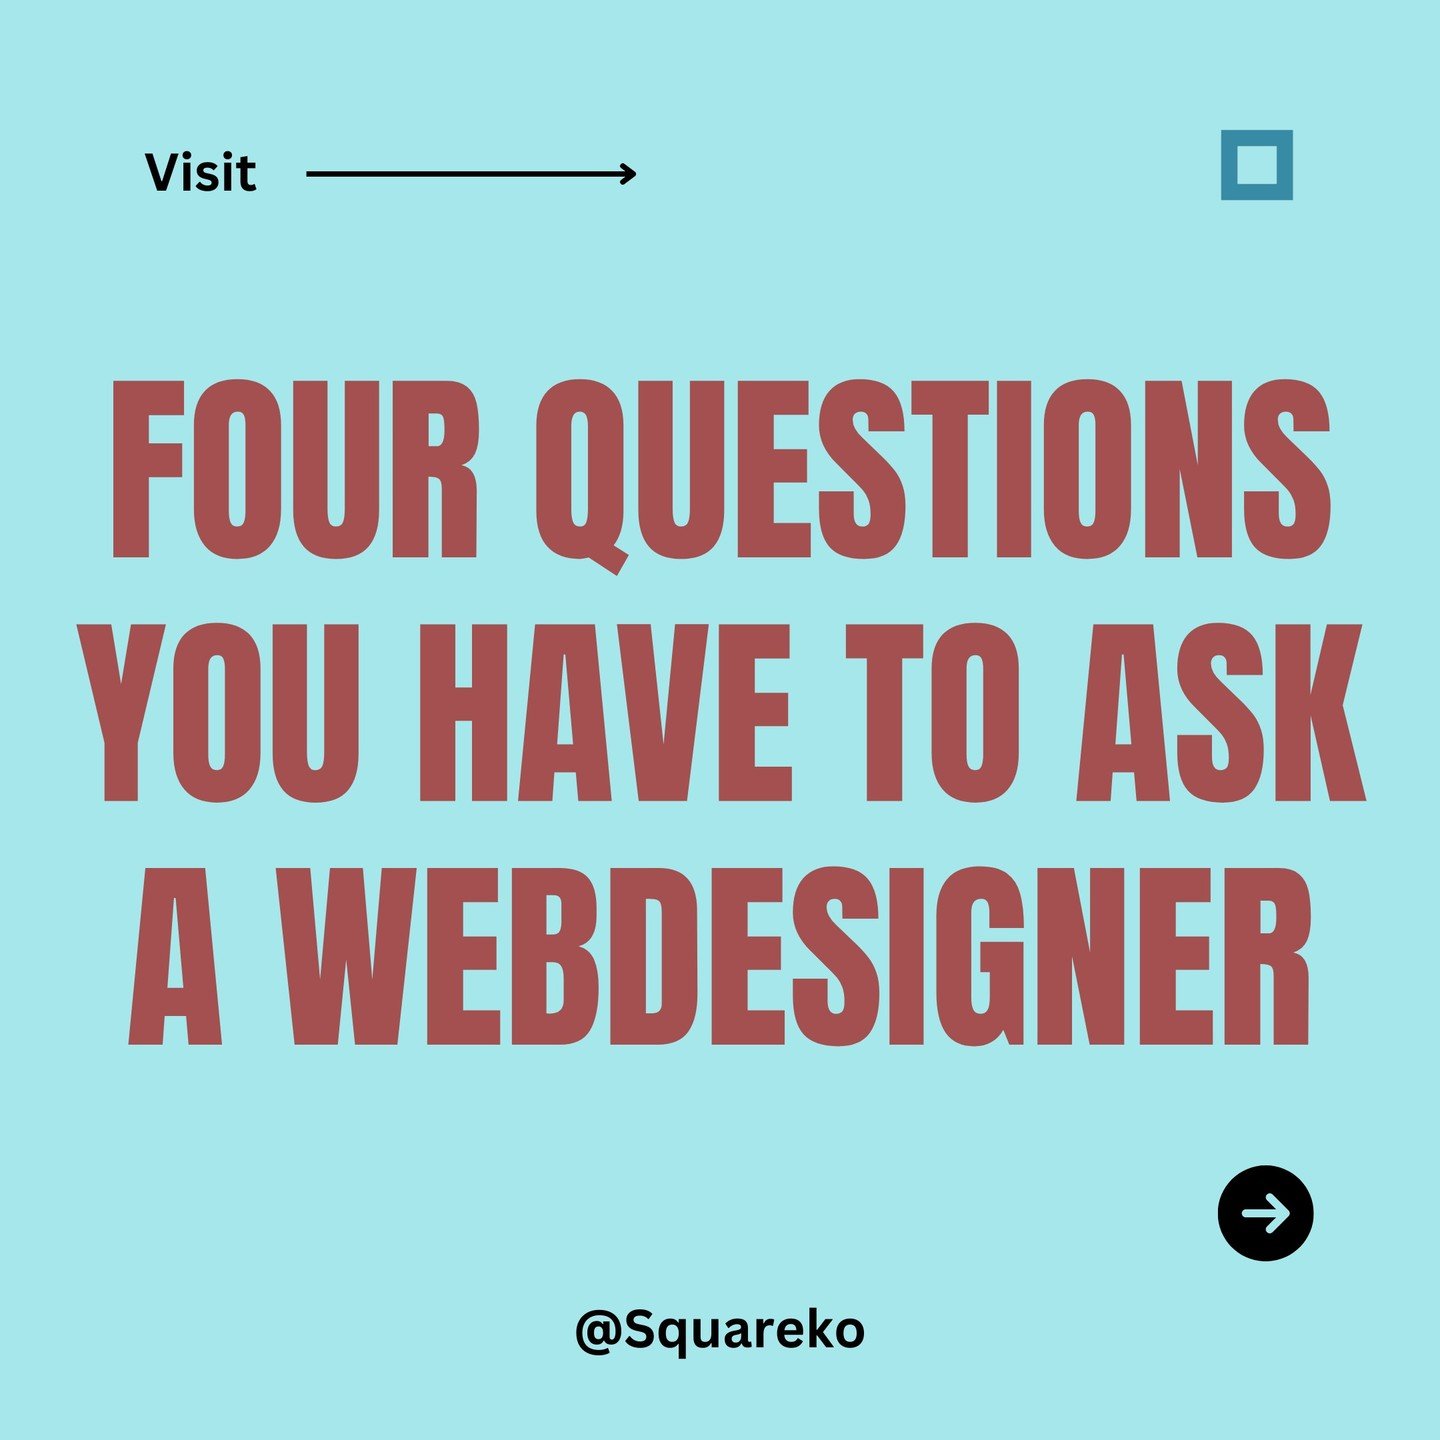 Thinking about hiring a web designer? Finding the right one can be a challenge. Here are five essential questions to ask before collaborating with a designer. Plus, watch out for these red flags. Keep this handy for when you're interviewing potential